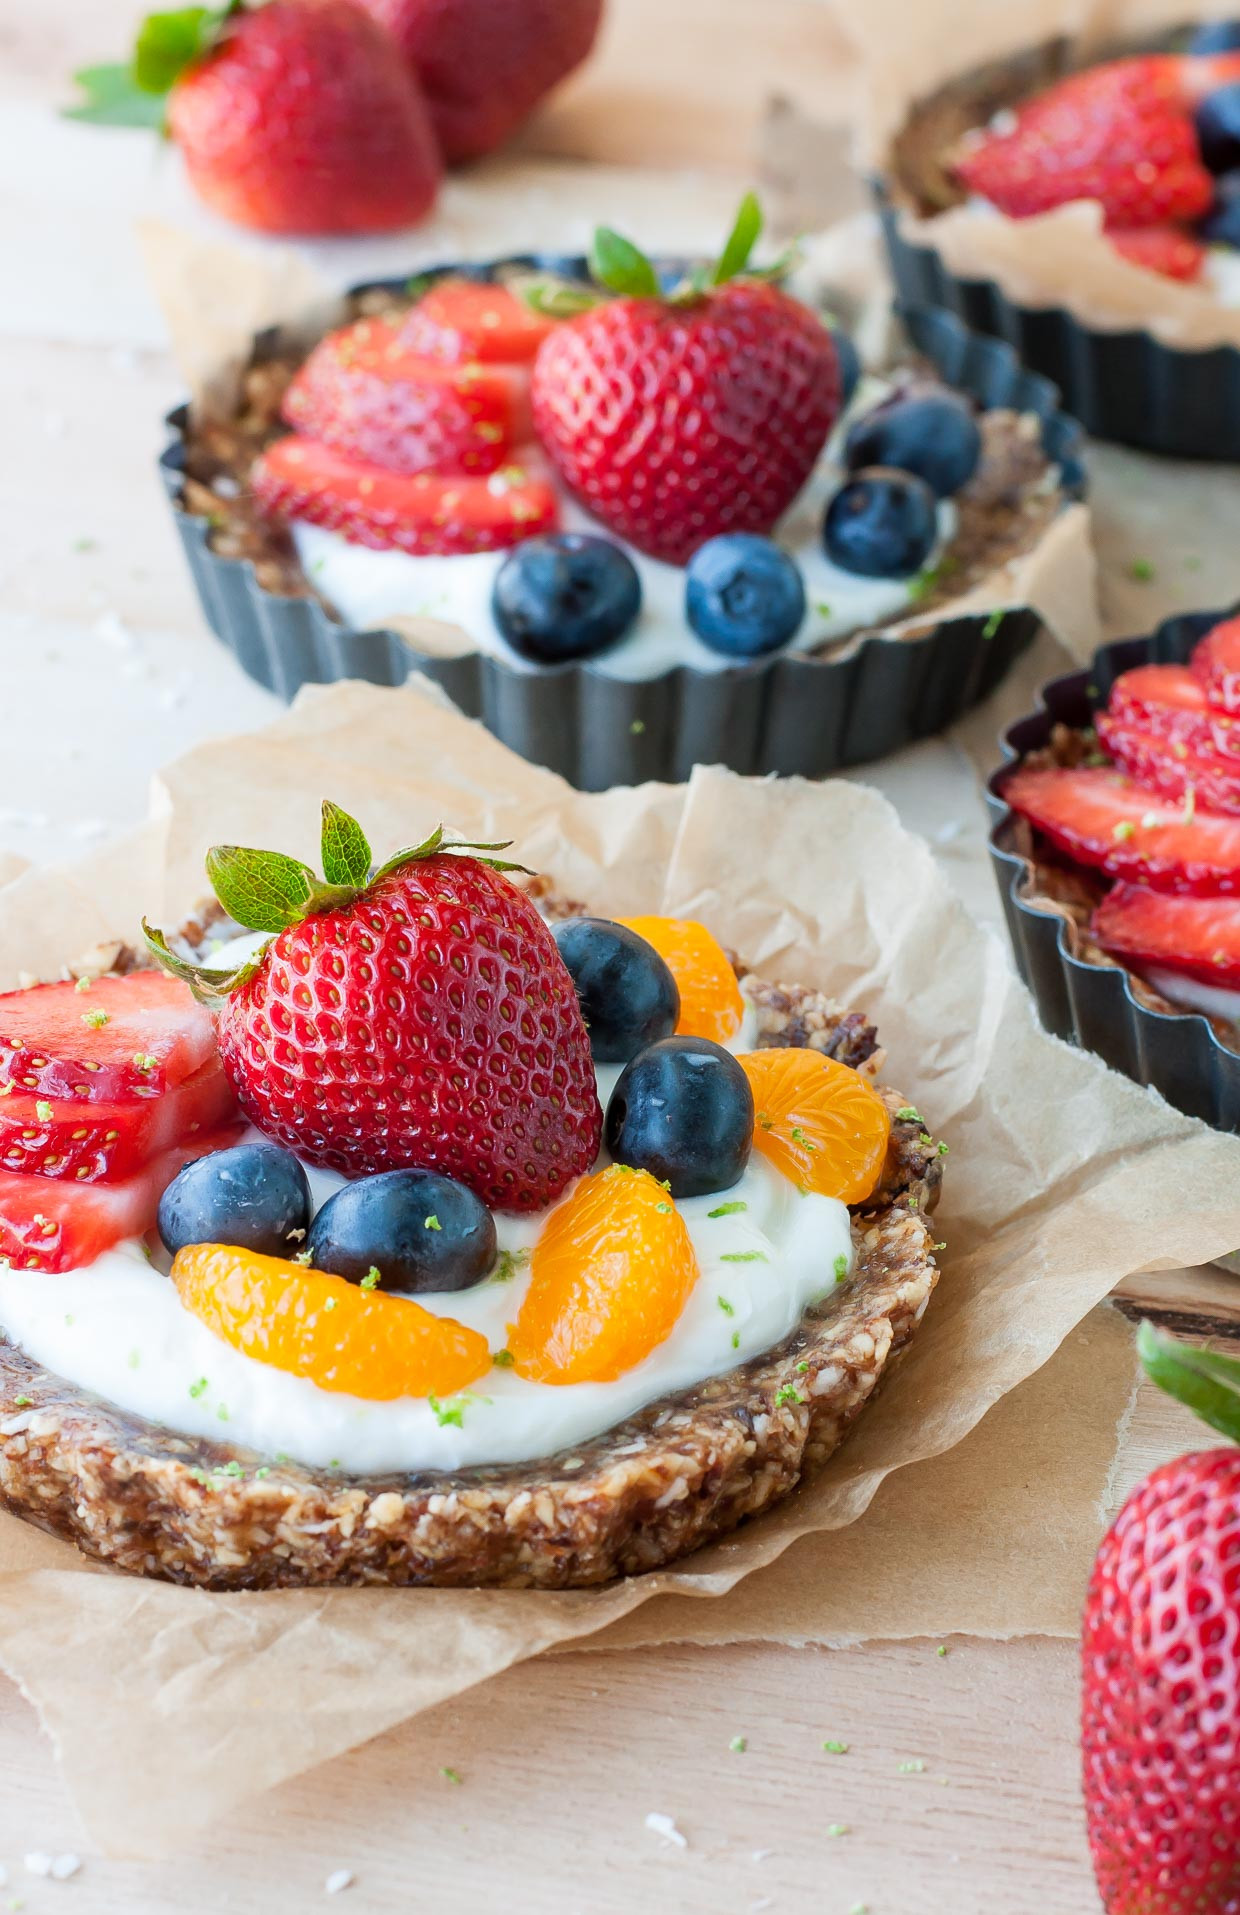 Fruit Desserts Recipes
 Healthy No Bake Coconut Lime Tarts with Fruit and Yogurt